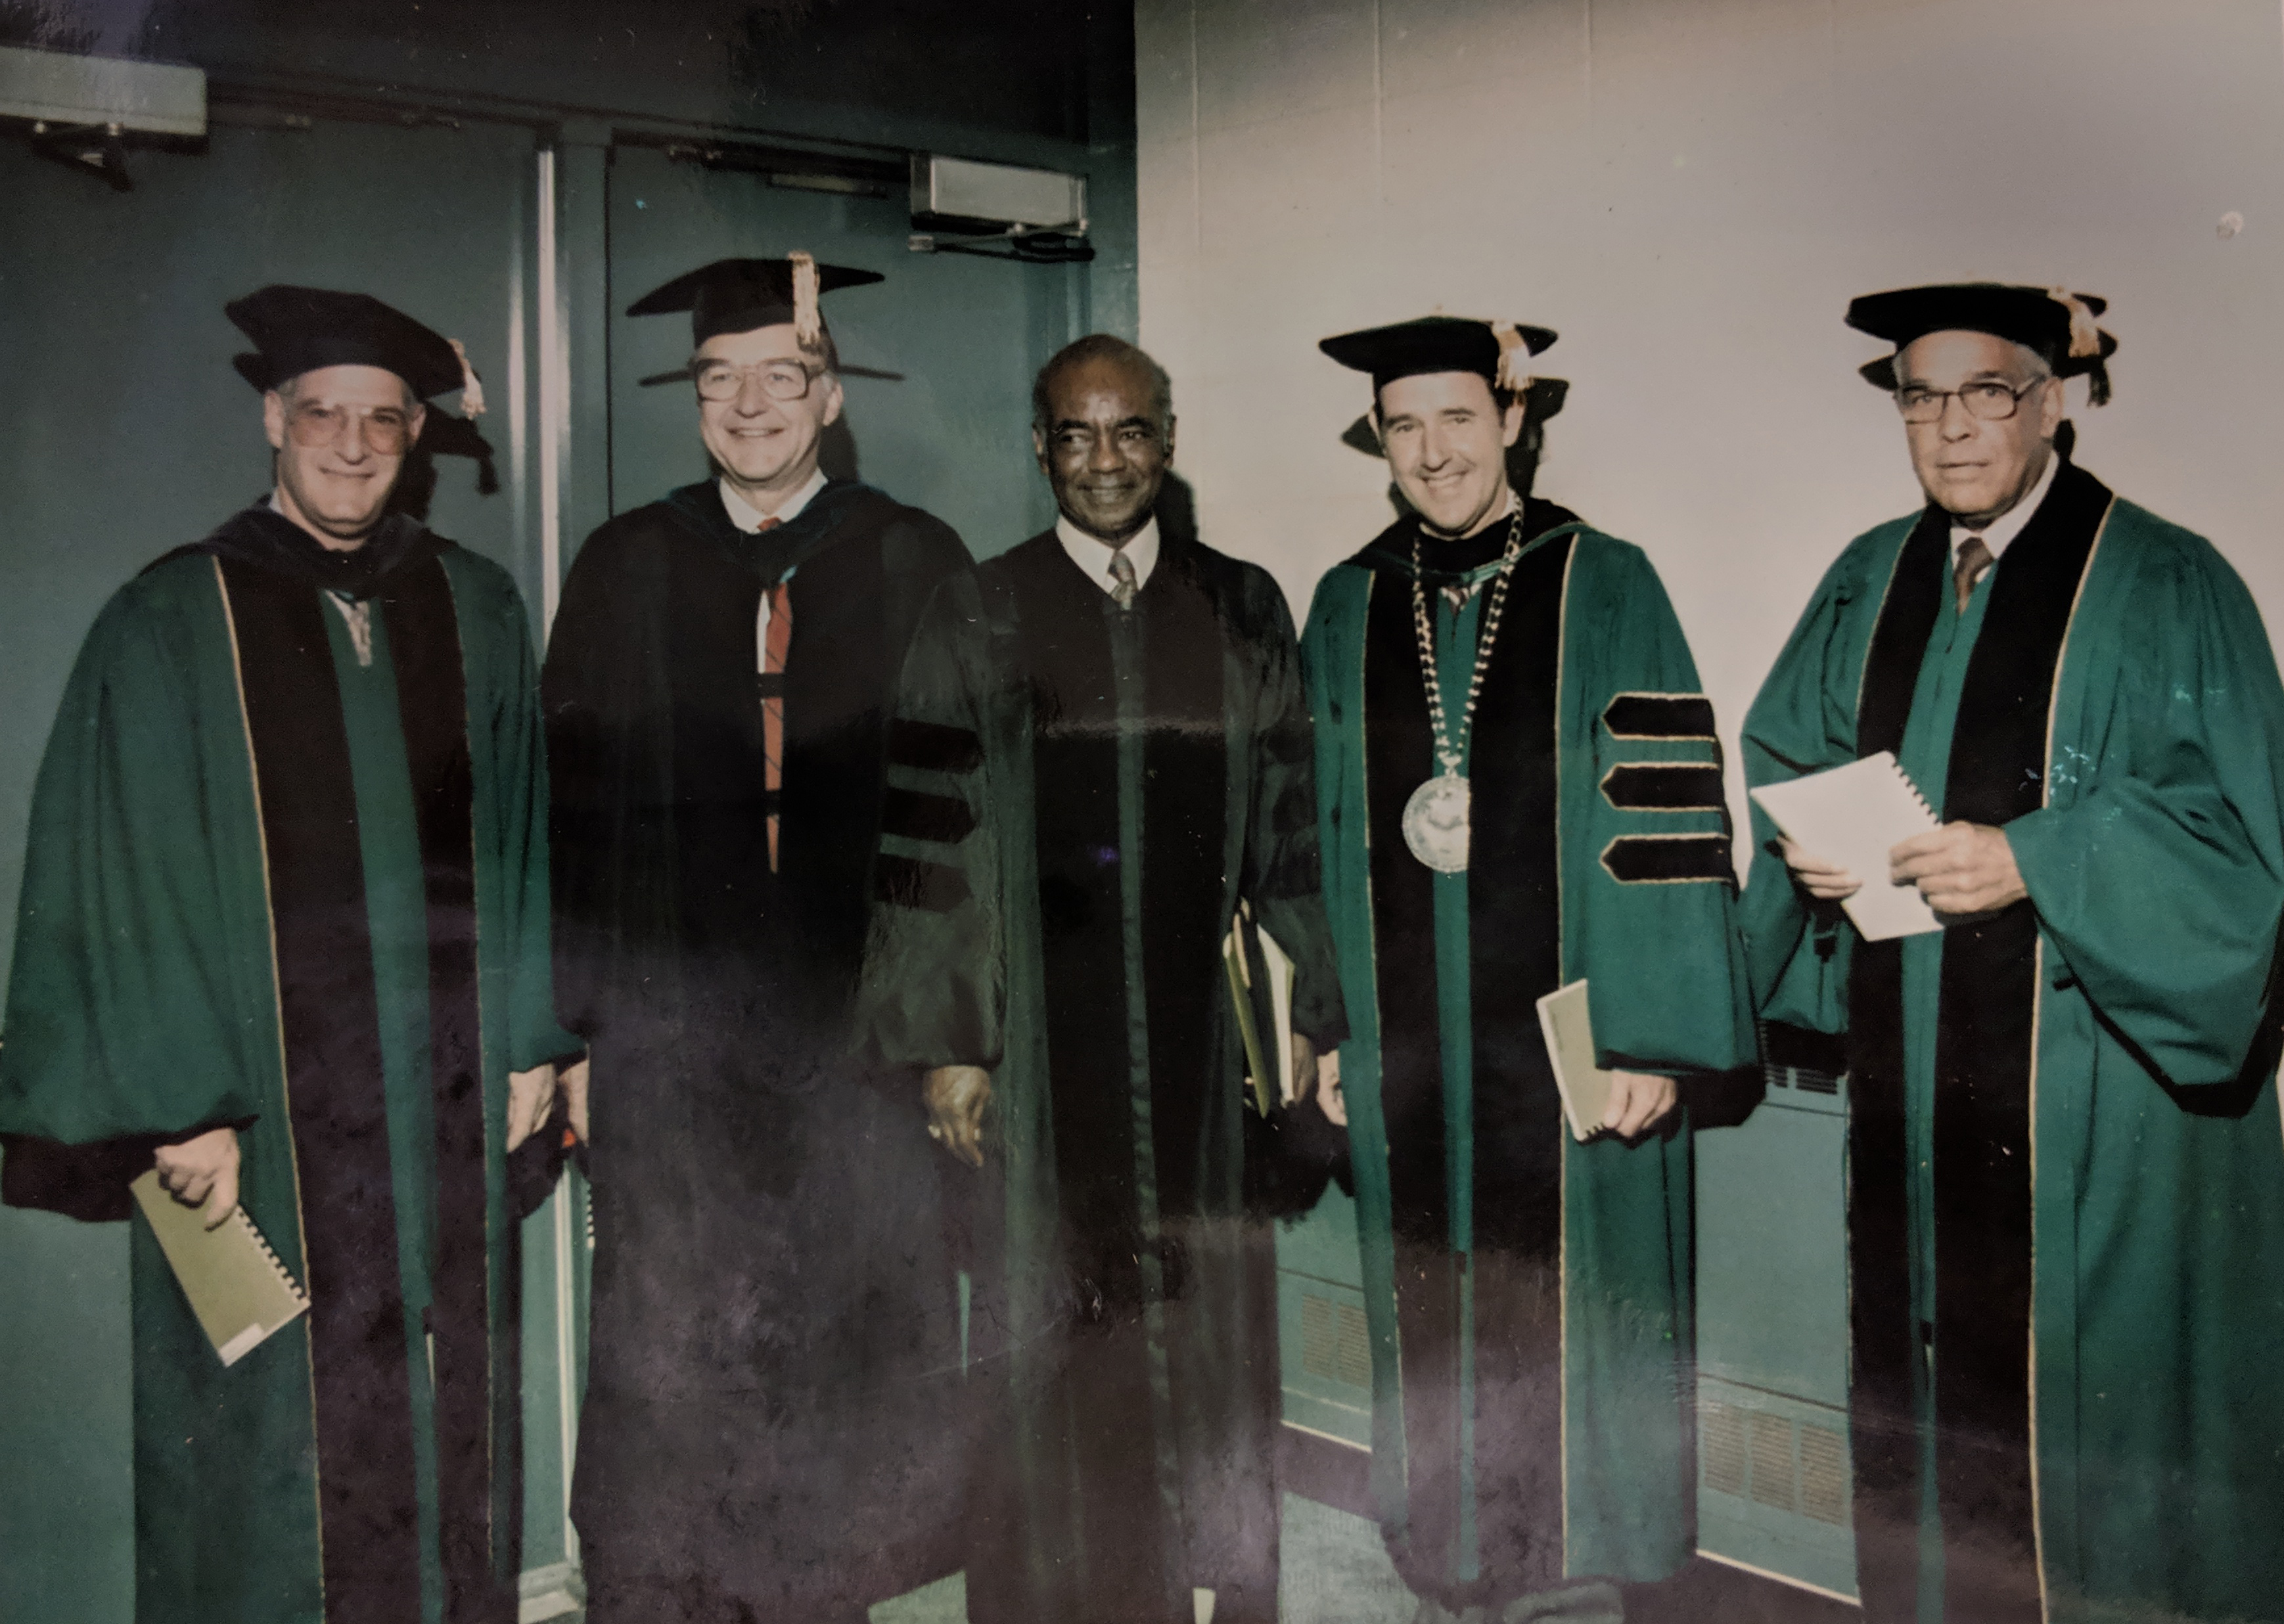 C.J. McLin, Jr. (center), on the occasion of receiving an honorary Doctor of Humane Letters degree from Wright State University; WSU President Paige Mulholland is second from right.